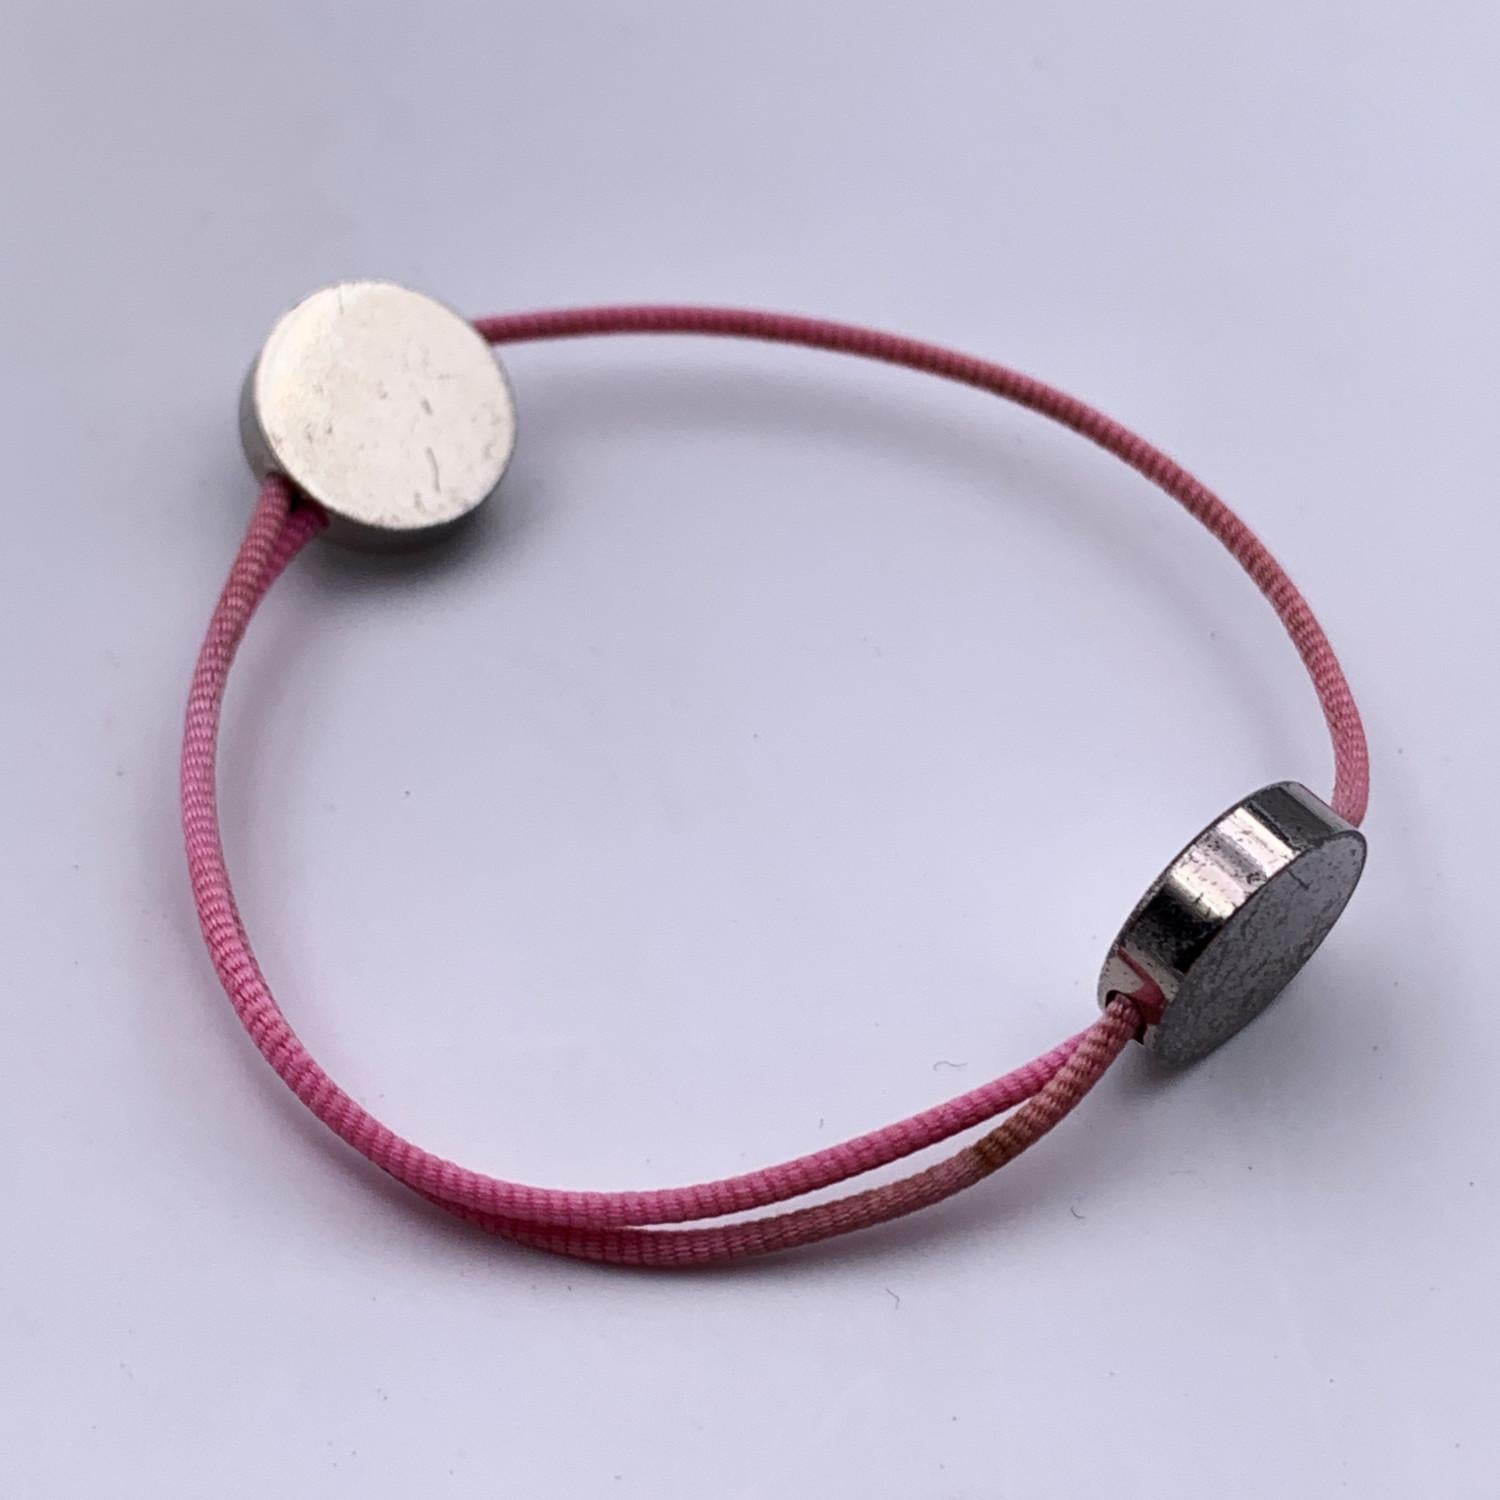 Cotton cord bracelet by HERMES in pink color. 2 silver metal studs with Hermes Paris writings. 
Condition

B - VERY GOOD

Gently used. Some darkness on silver metal elements. Please, look carefully at the photos and ask for any